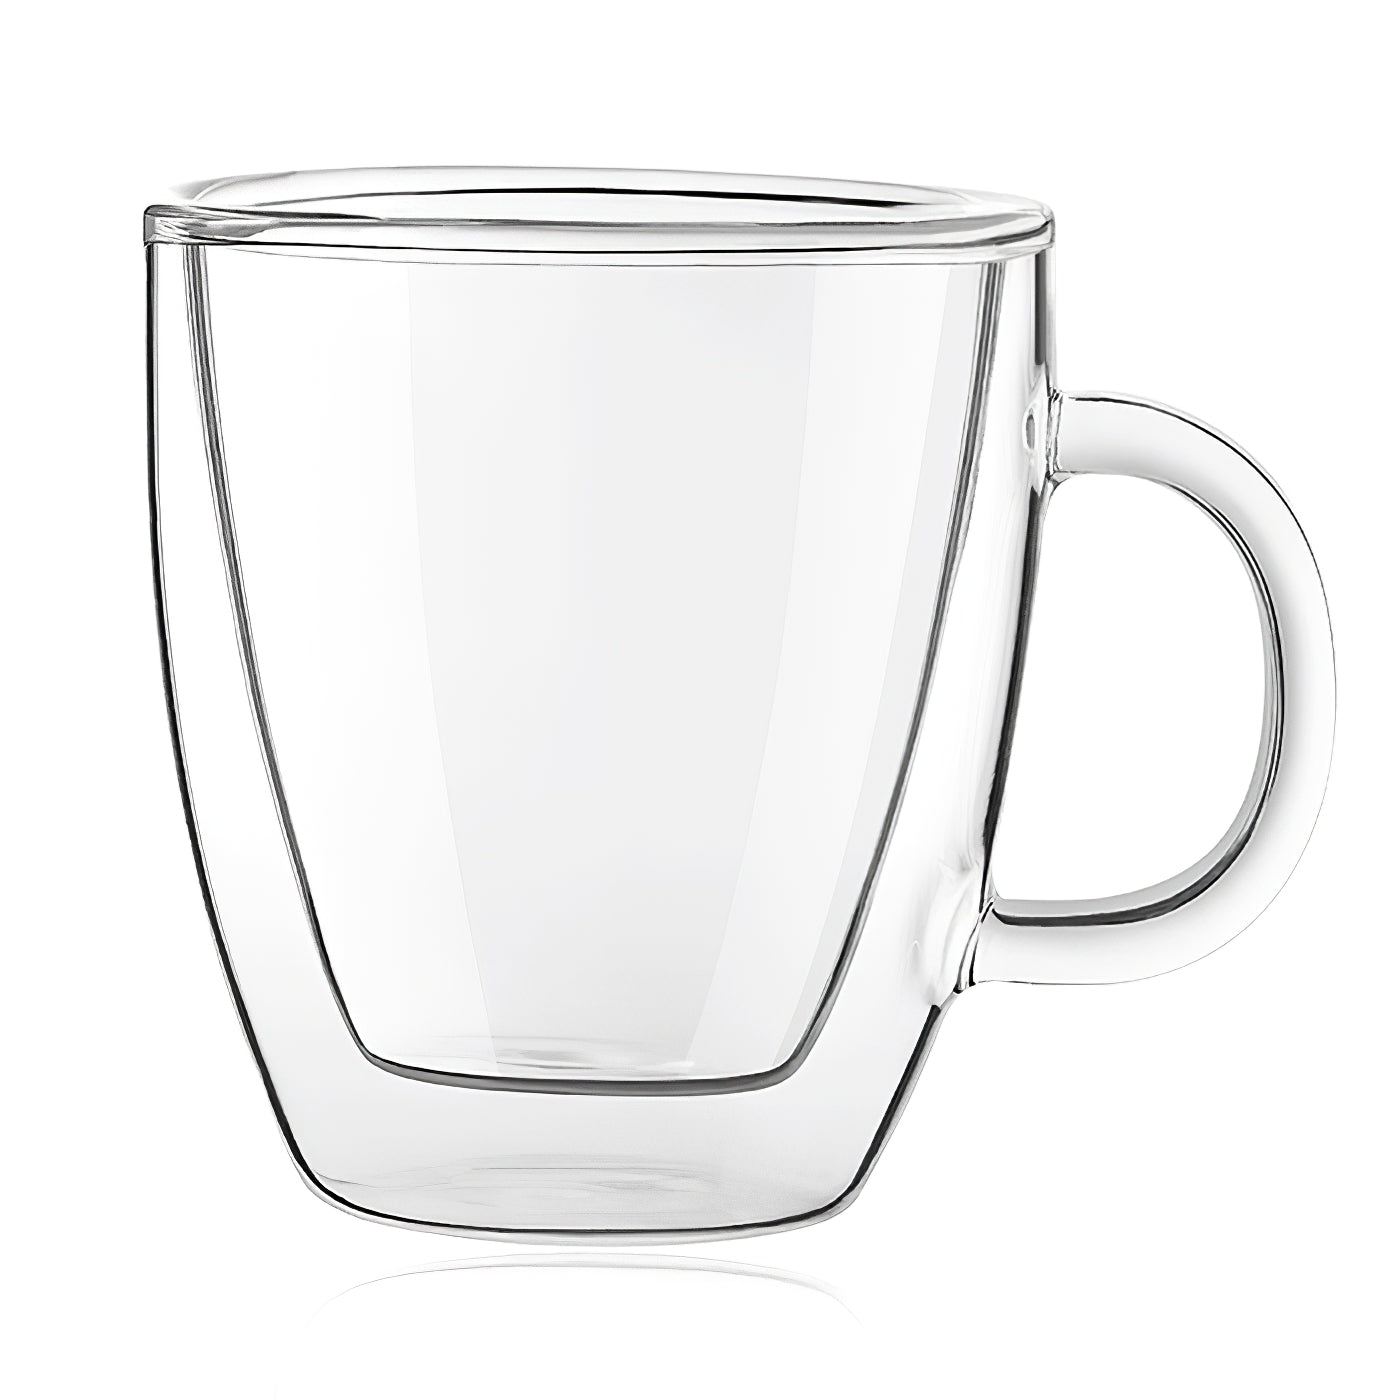 2x Mugs Glass Espresso Cup - Double Wall Insulated Clear Coffee